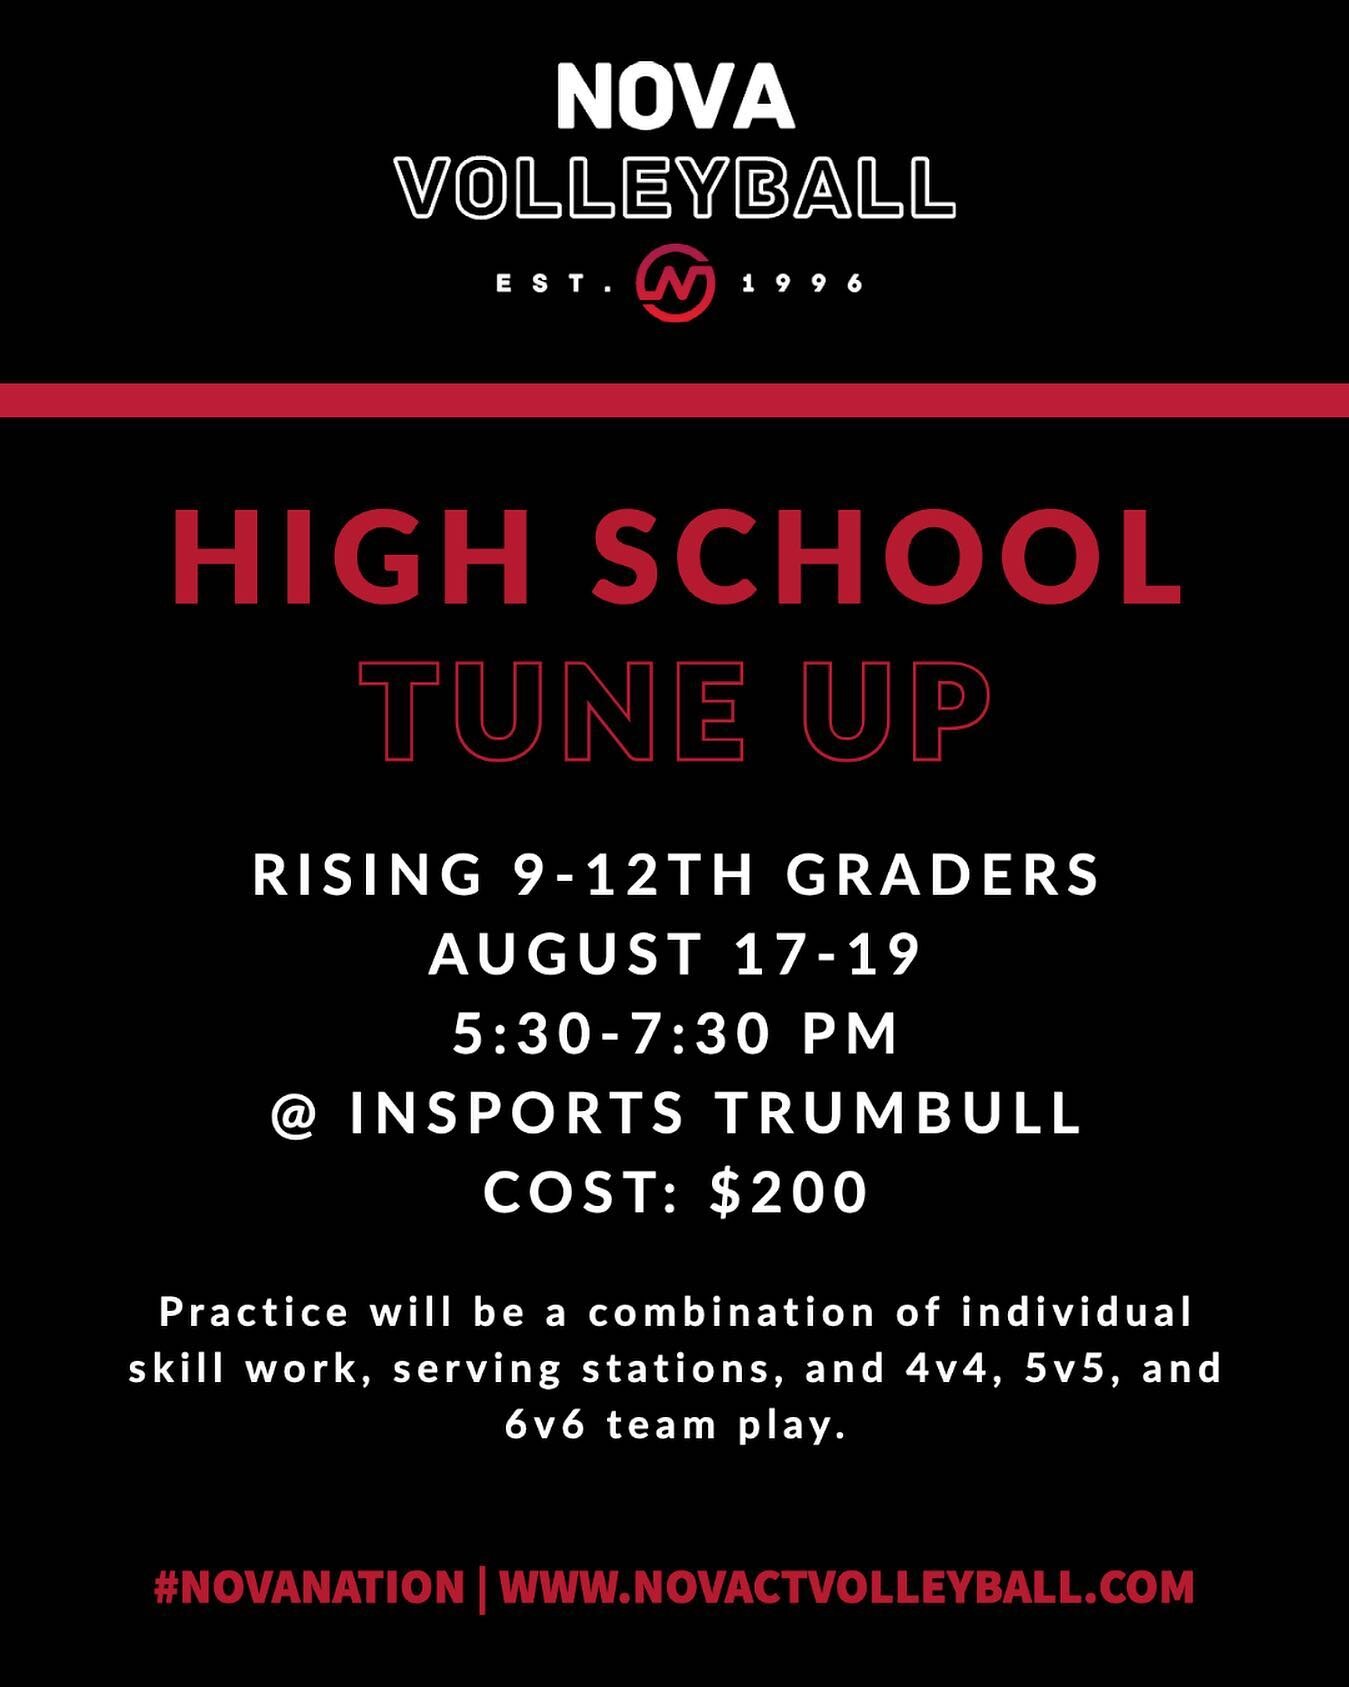 🚨 HIGH SCHOOL TUNE UP 🚨 

Space is L I M I T E D! Grab your spot today and don&rsquo;t miss out on the extra reps before high school tryouts!! Open to all rising 9-12 graders. More info below:

When: August 17-19
Time: 5:30-7:30 pm
Location: Inspor